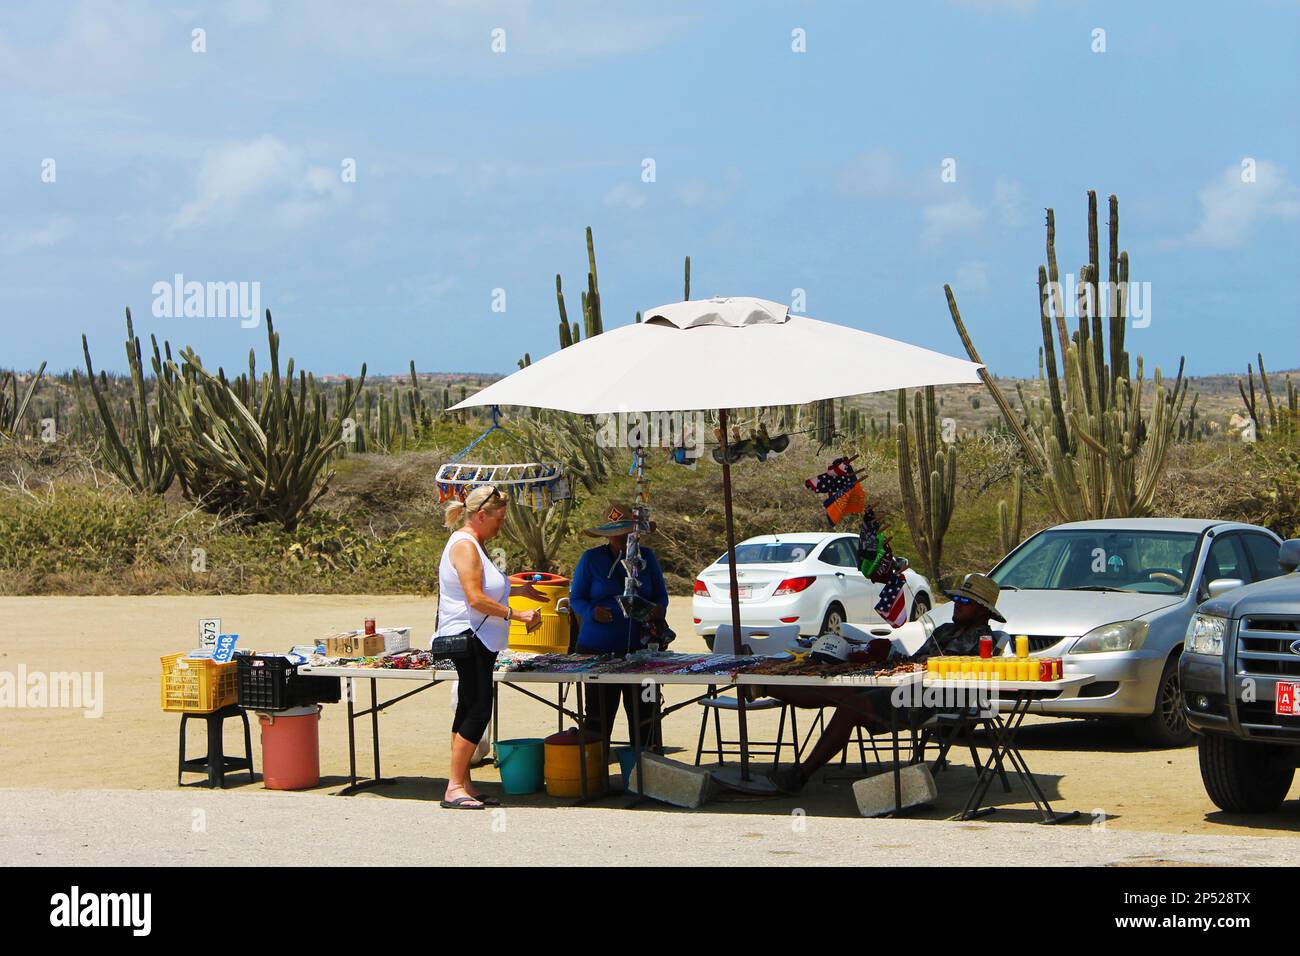 Alto Vista, Noord, Aruba - March 10, 2022. A street vendor selling souvenirs from a table at an outdoor market, on the parking lot of the Alto Vista Stock Photo